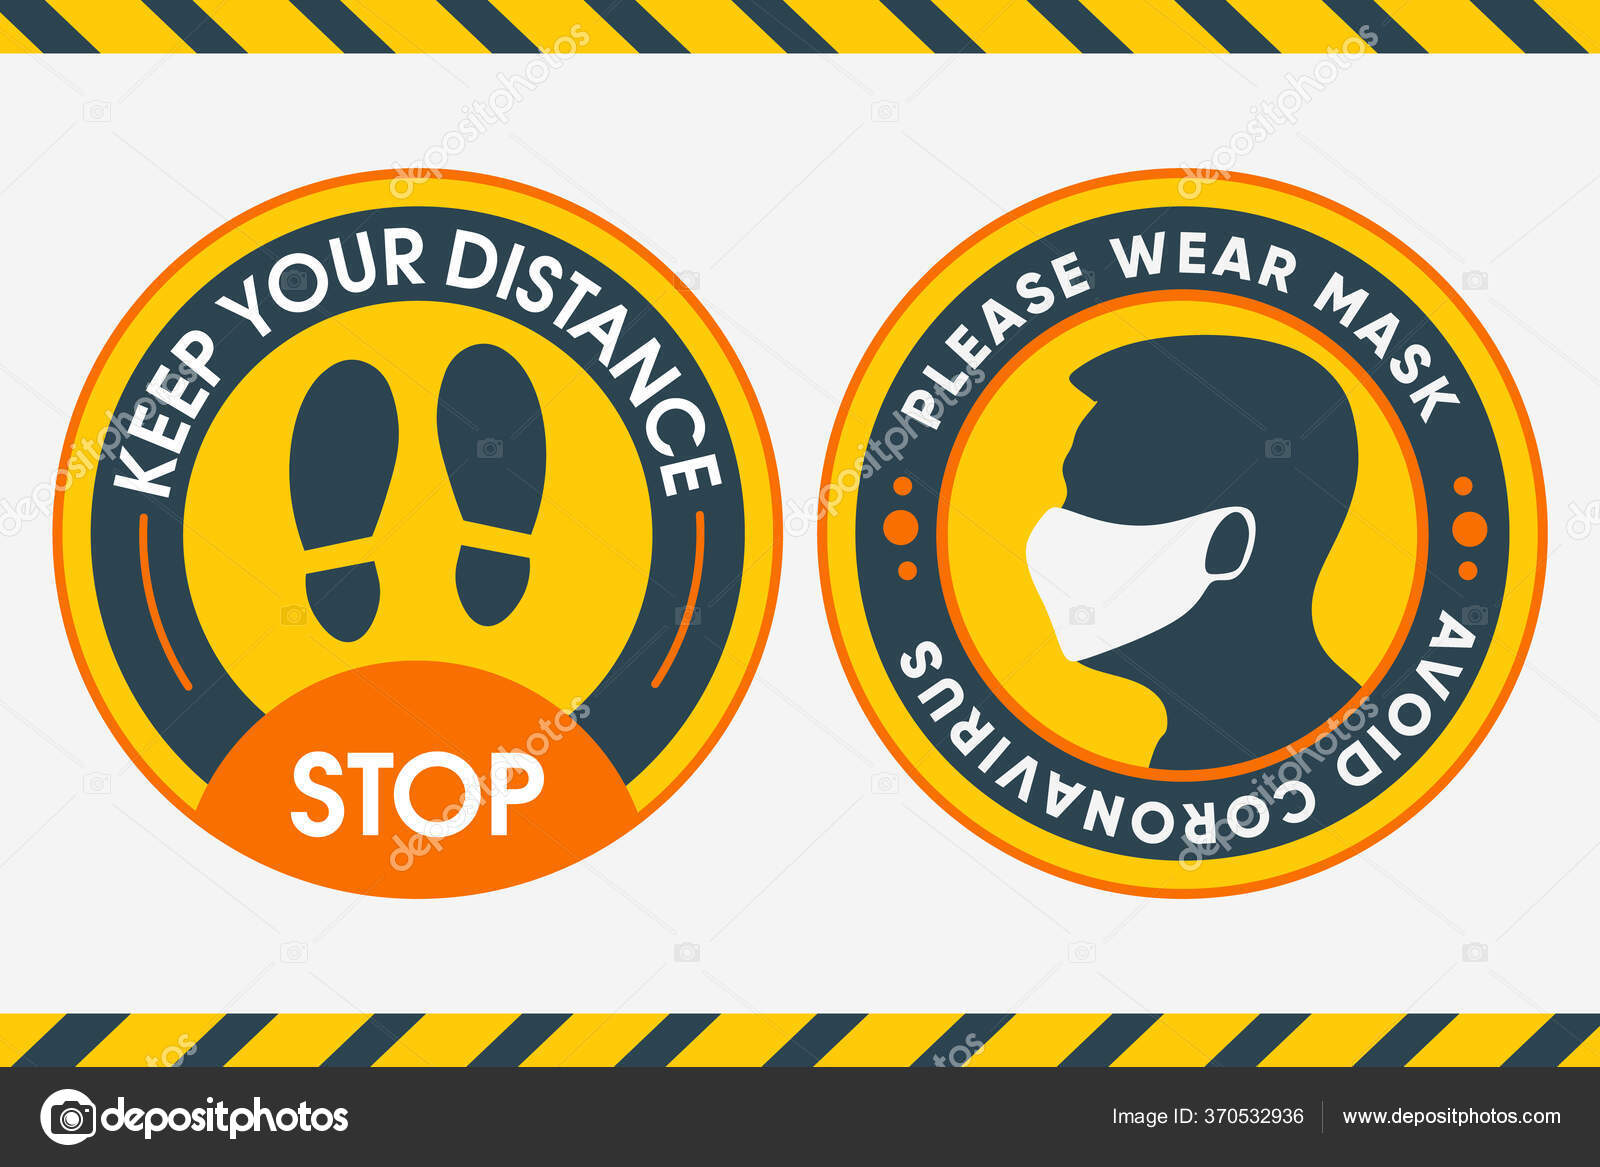 Yellow Round Sticker for print. Keep your distance and Please wear